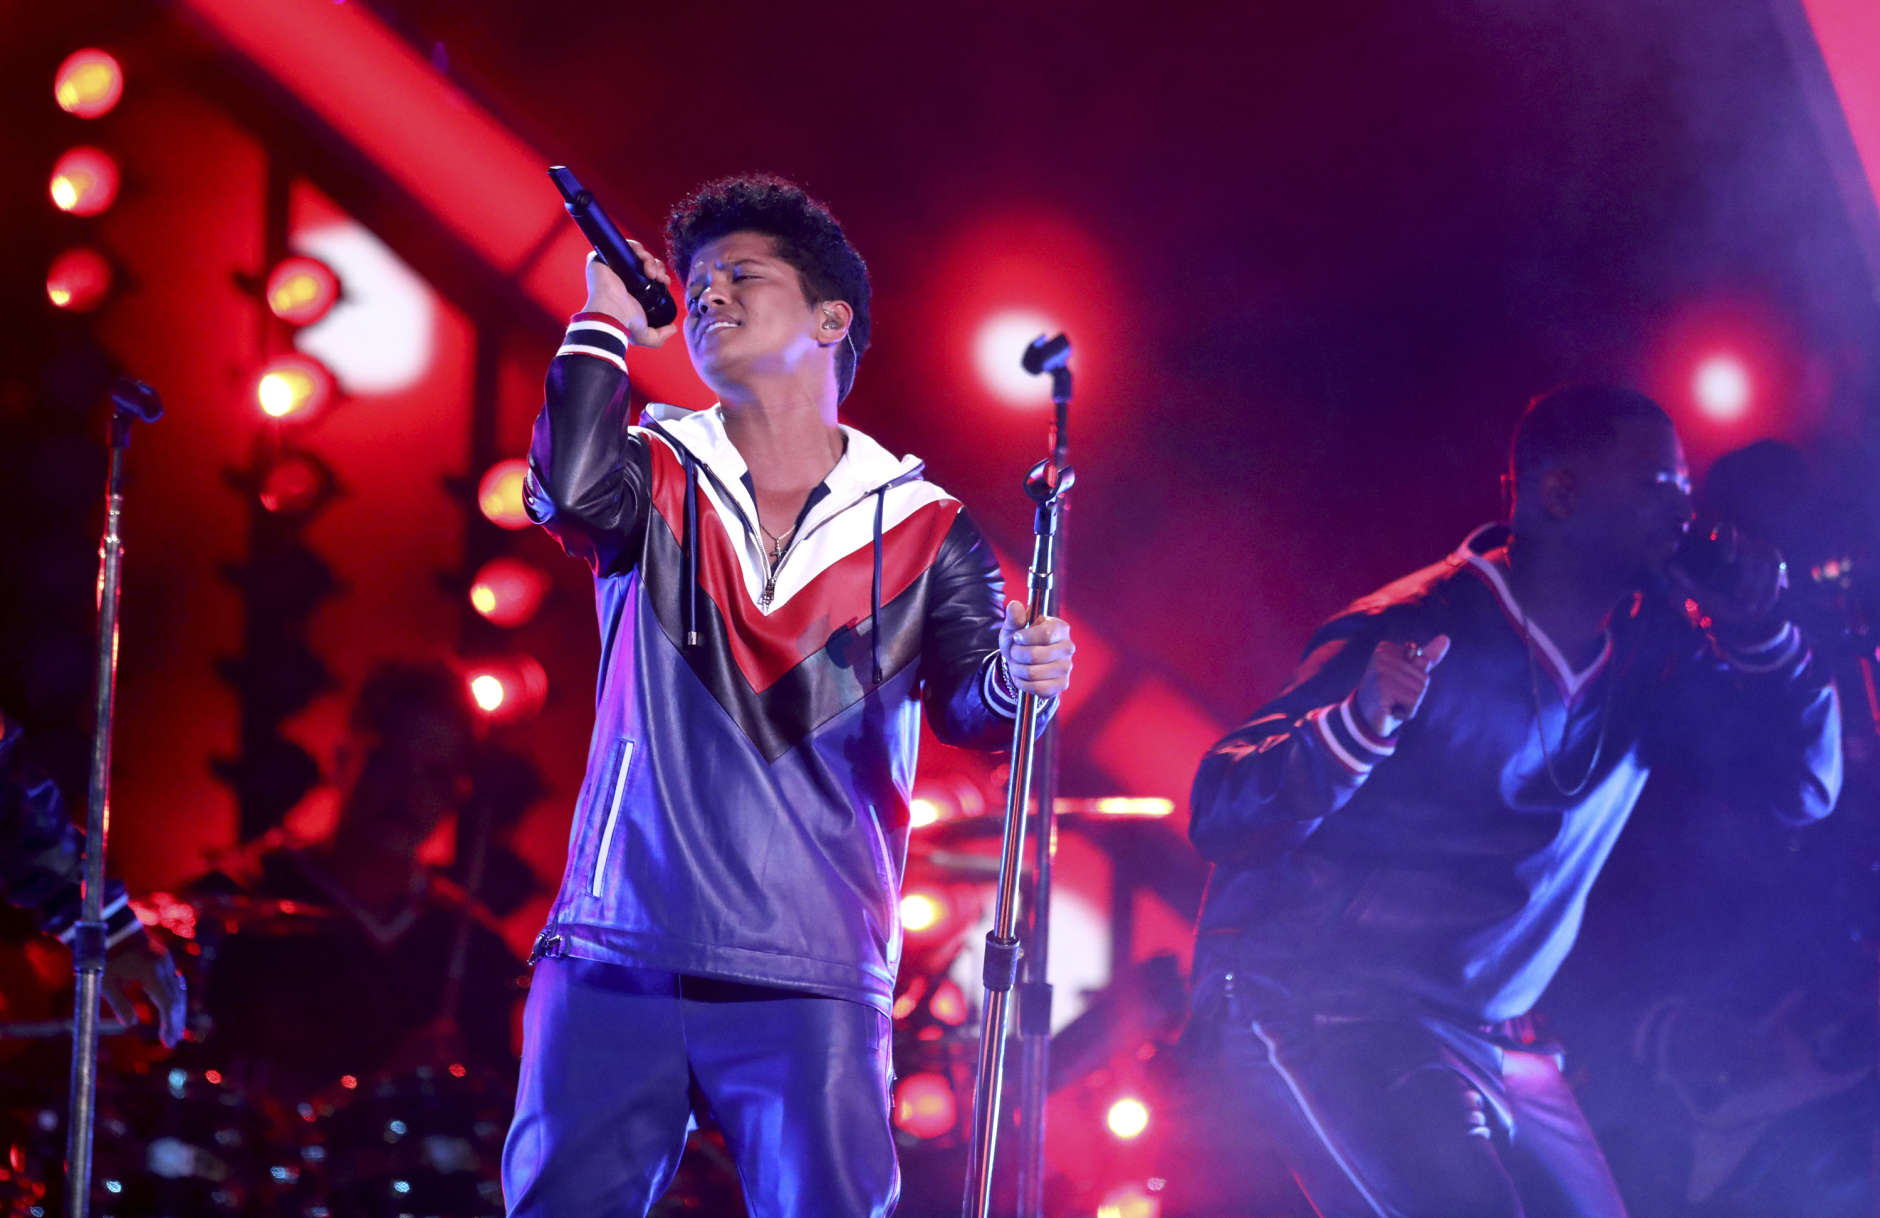 Bruno Mars performs "That's What I Like" at the 59th annual Grammy Awards on Sunday, Feb. 12, 2017, in Los Angeles. (Photo by Matt Sayles/Invision/AP)